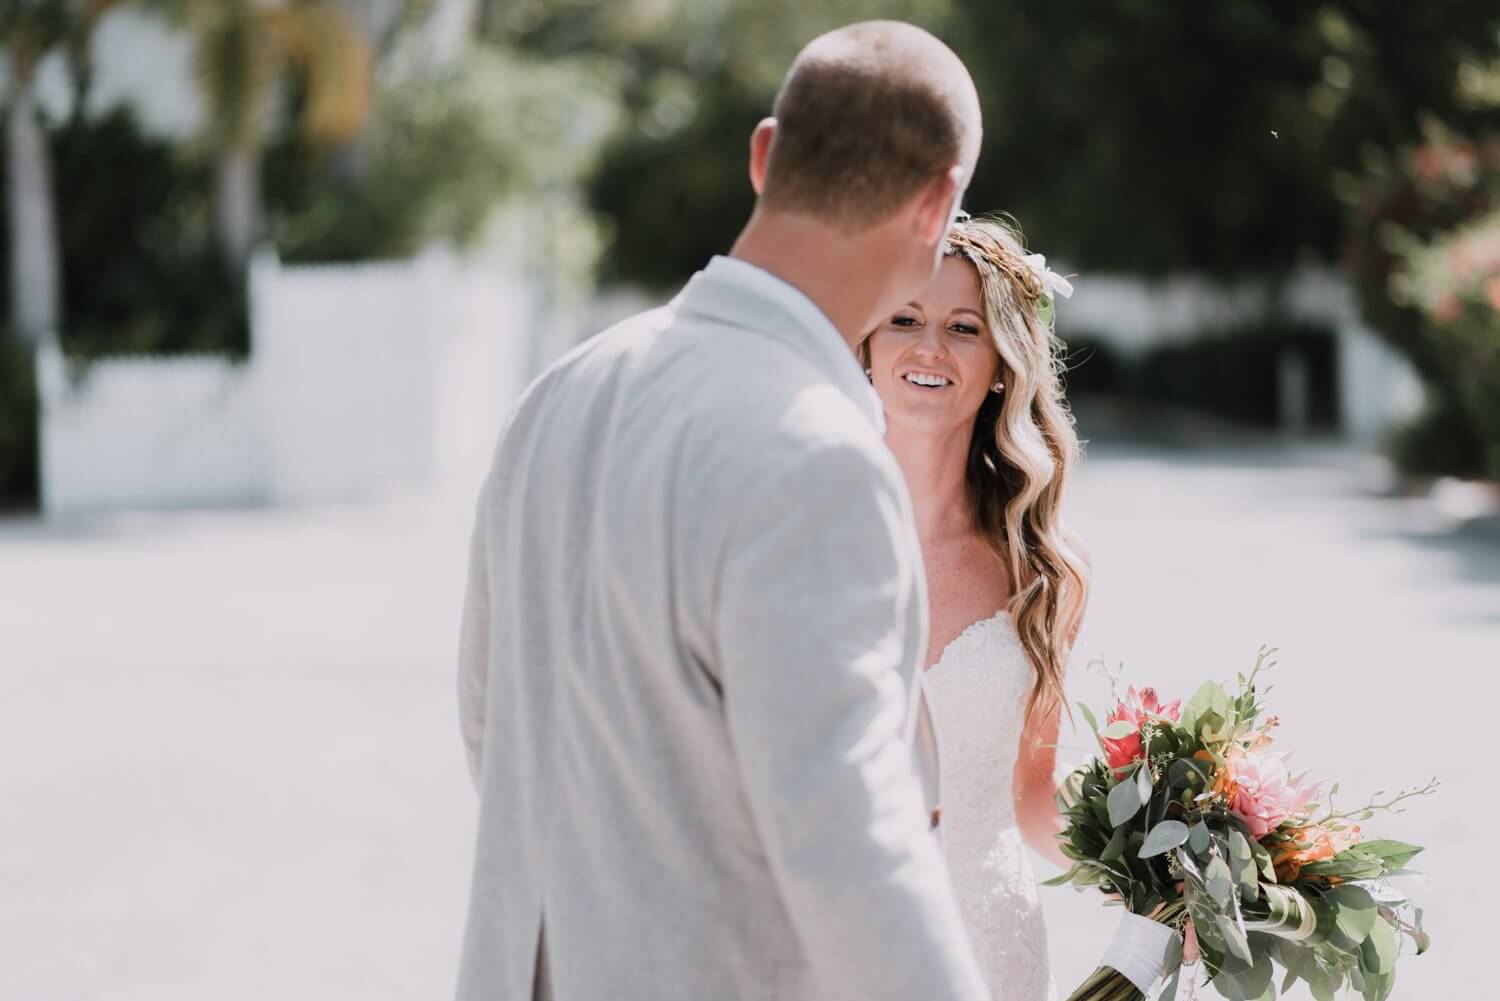 A couple of newlyweds, Kristina and Forrest, smiling while walking down the street in Key West as captured by a Fort Zachary Taylor wedding photographer.